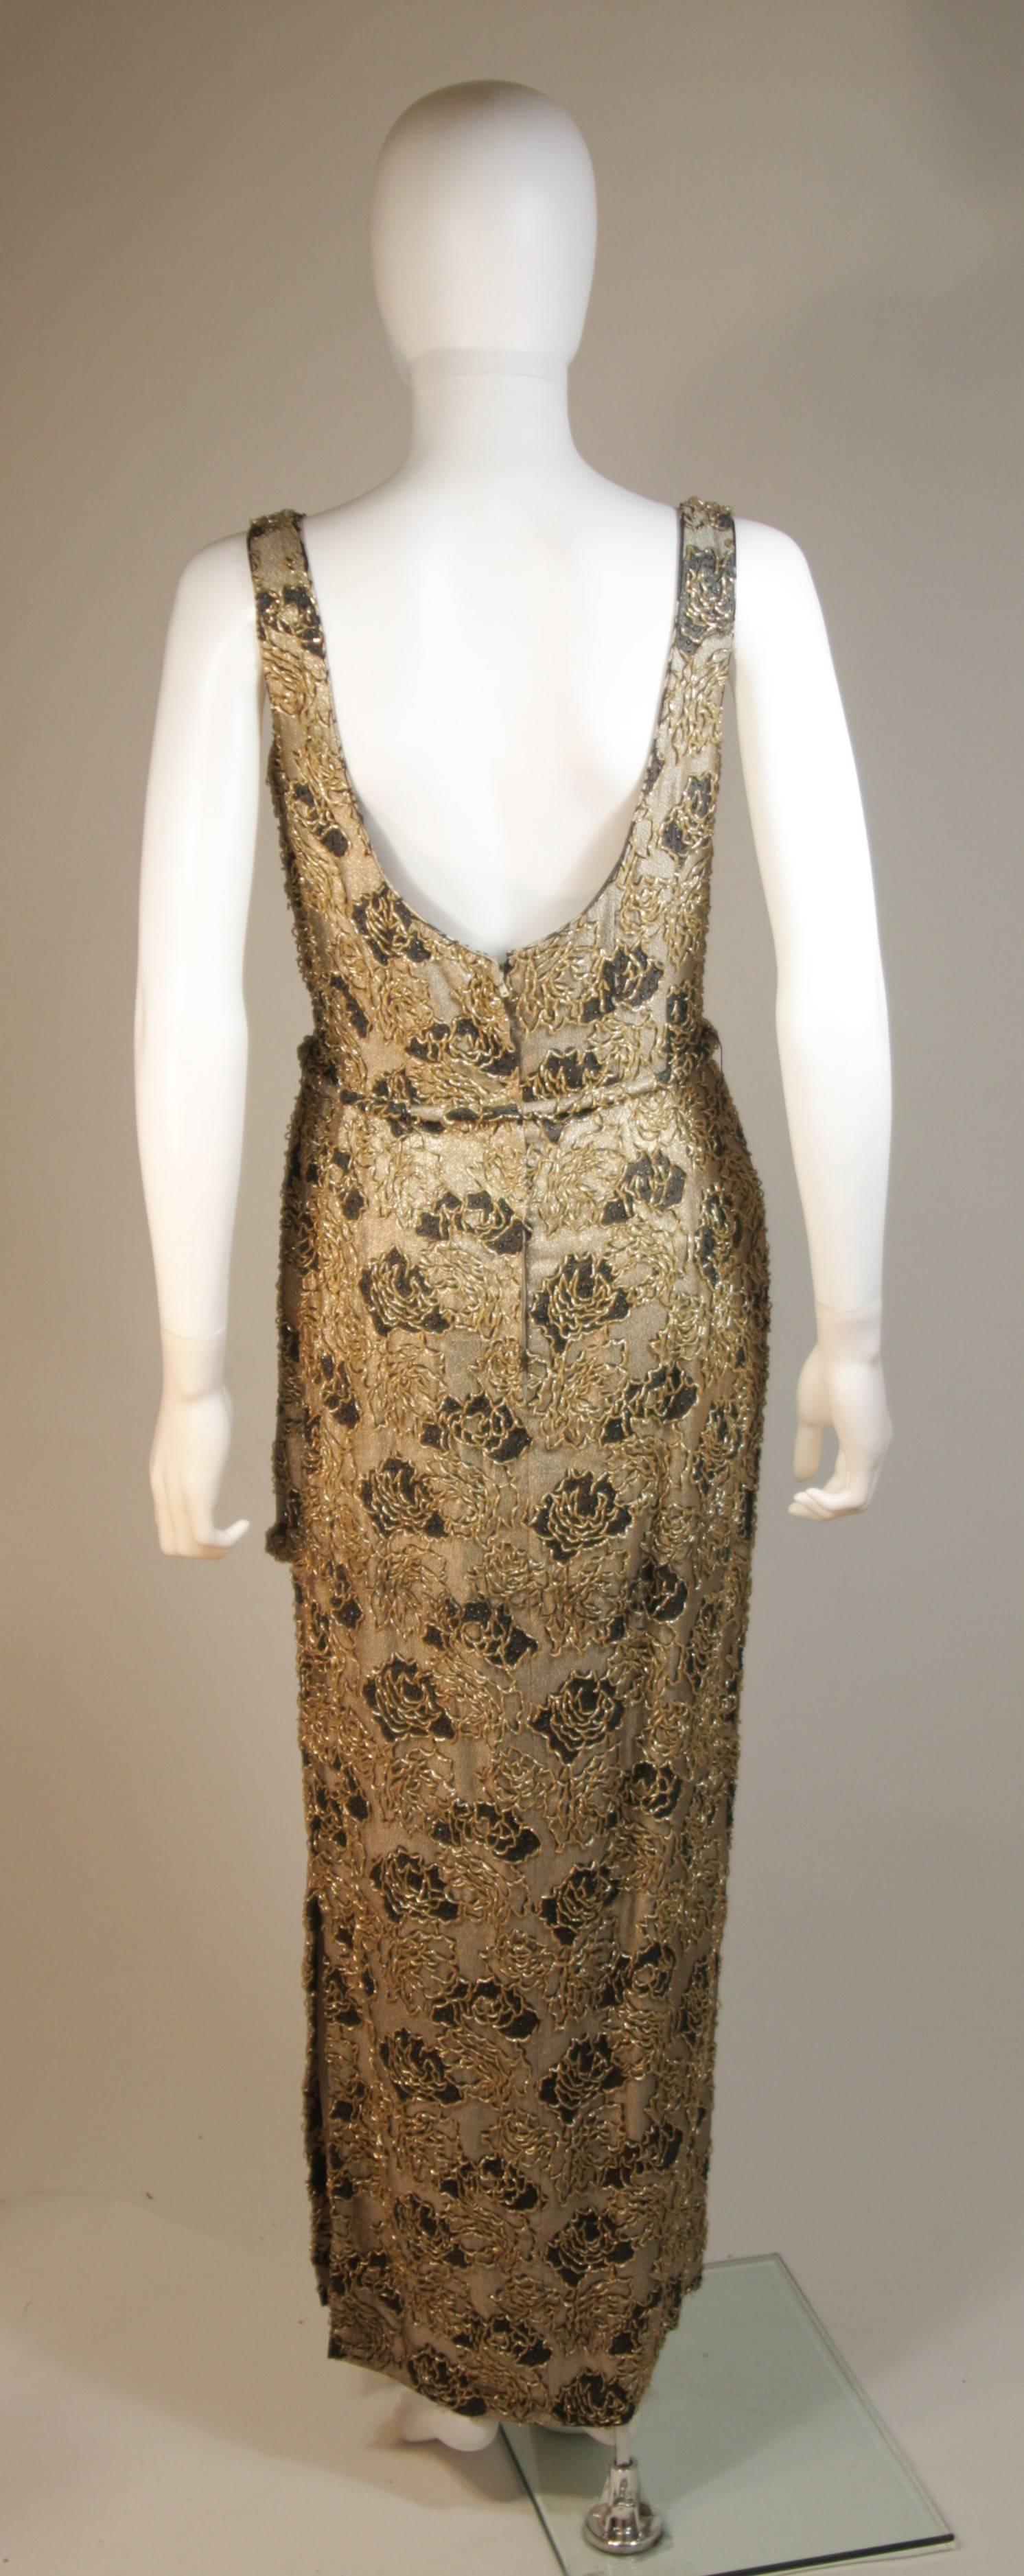 HAUTE COUTURE INT'L Gold and Black Beaded Gown with Opera Coat Size 6 For Sale 1